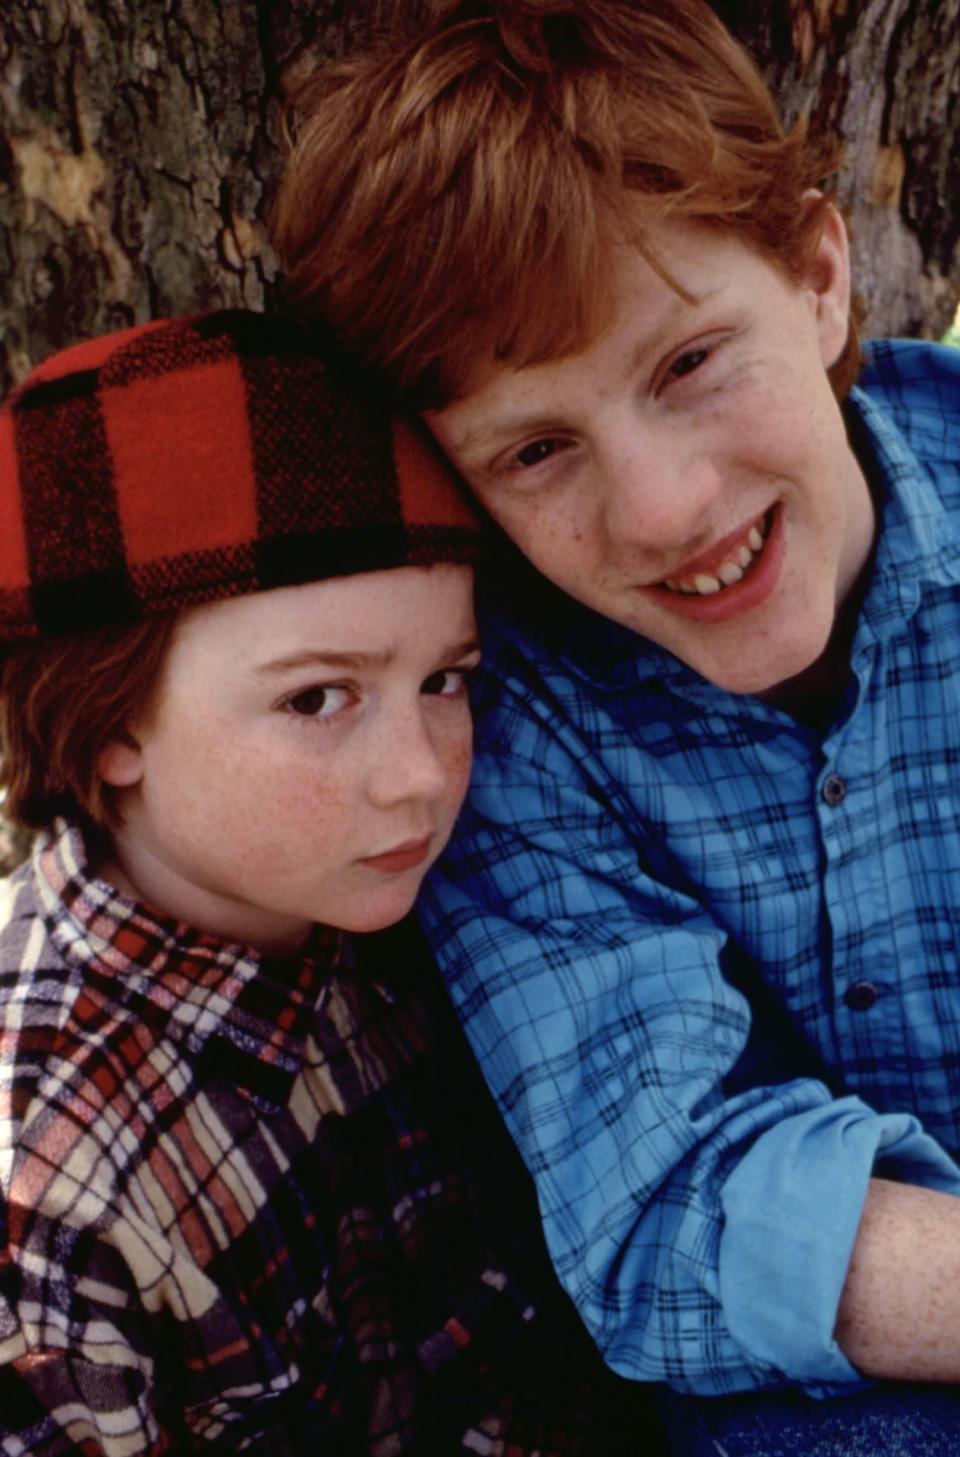 Big Pete and Little Pete from Nickelodeon’s “Adventures of Pete and Pete.”